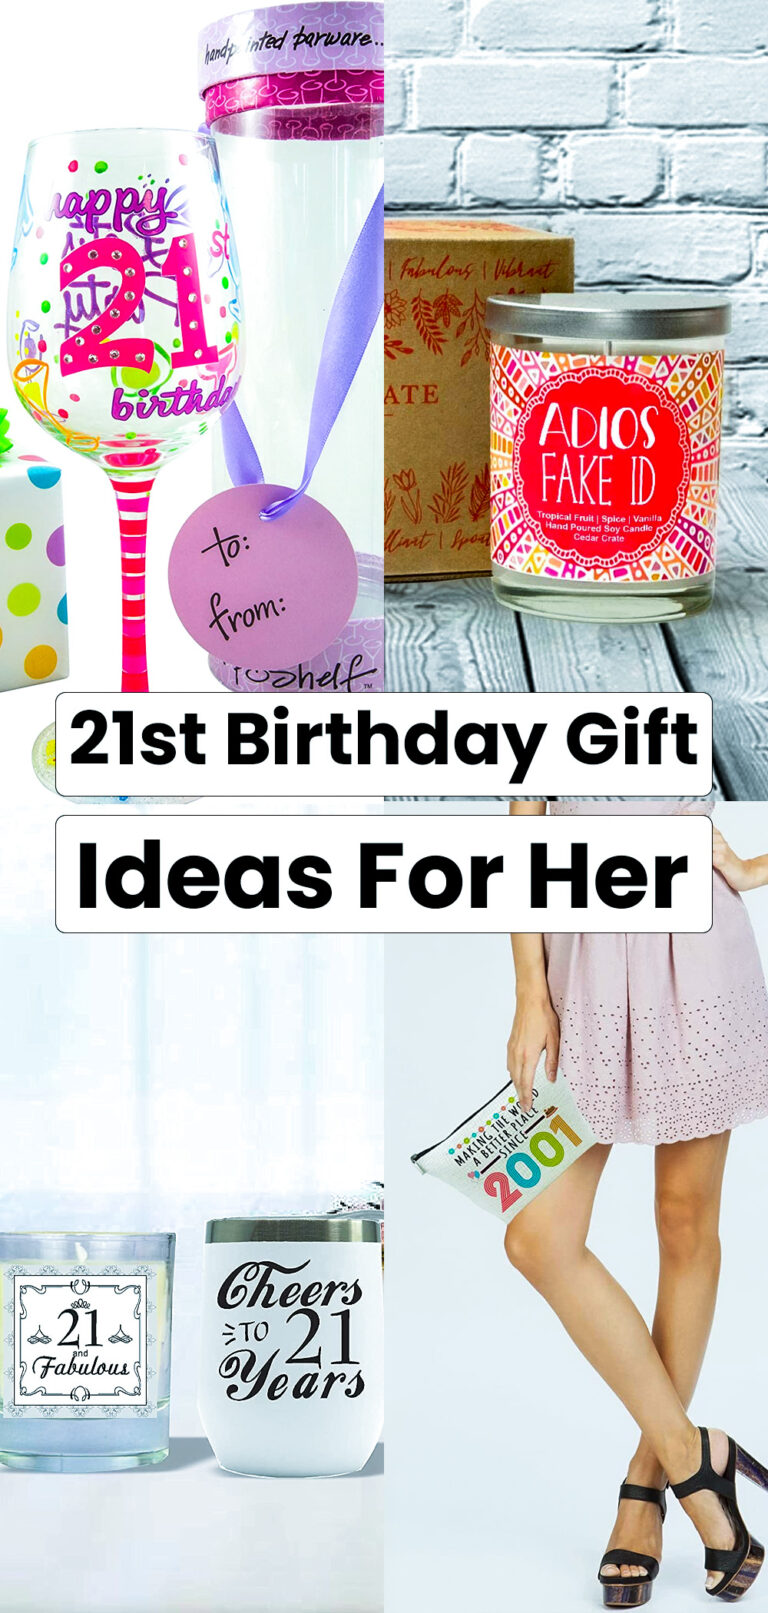 21st Birthday Gift Ideas for Her